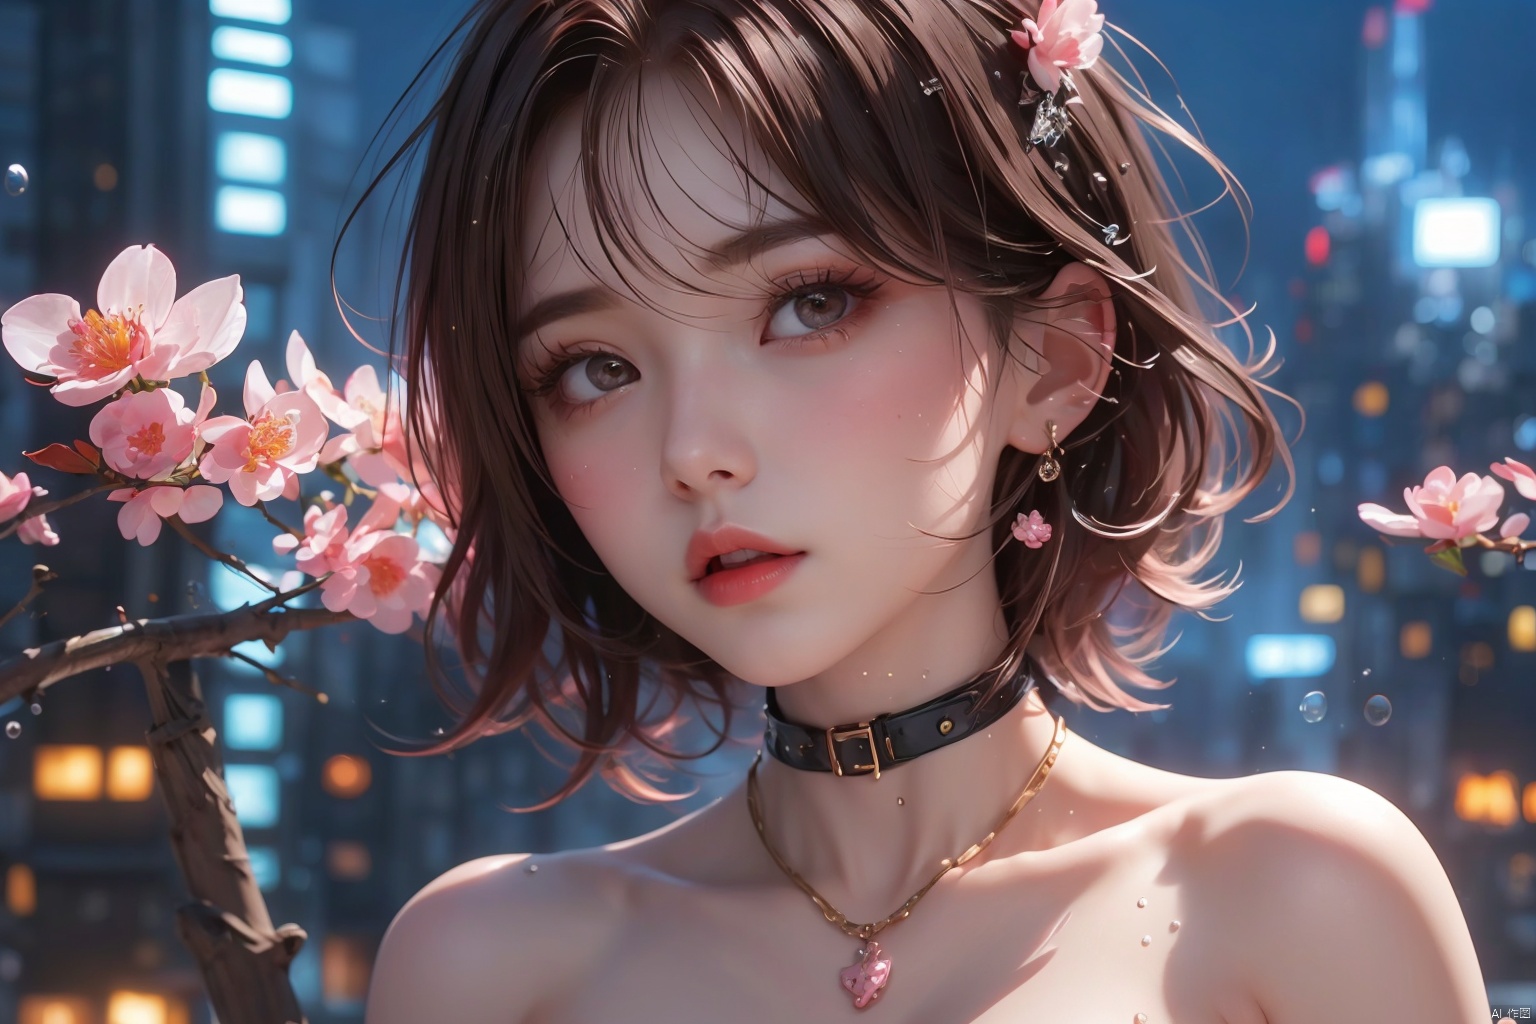  KK-Comic Style,looking at viewer,bangs,lips,makeup,on bed,red lips,peach blossom eye,pink hair,crop_top,skirt,night_sky,rooftop,city,neon lights,highly detailed,ultra-high resolutions,32K UHD,best quality,masterpiece,

1girl\((bishoujo), (lovely face:1.6), (reddish black hair:1.6), (browneyes:1.6), (small breast:1.8), (straight_hair:1.4), (short_hair:1.4), plump_*****, (hairless:1.2), long_legs, sharp_eyelid, black eyeliner, black eyelashes, reddish eyeshadow, (perfect detailed face), (pink lipgloss:1.3), (perfect hands)\),
(cry:1.4), (grimace:1.4),(full_body:1.2),(topless_(female):1.4), topless, 
water drop,water, partiallysubmerged,flower,airbubble